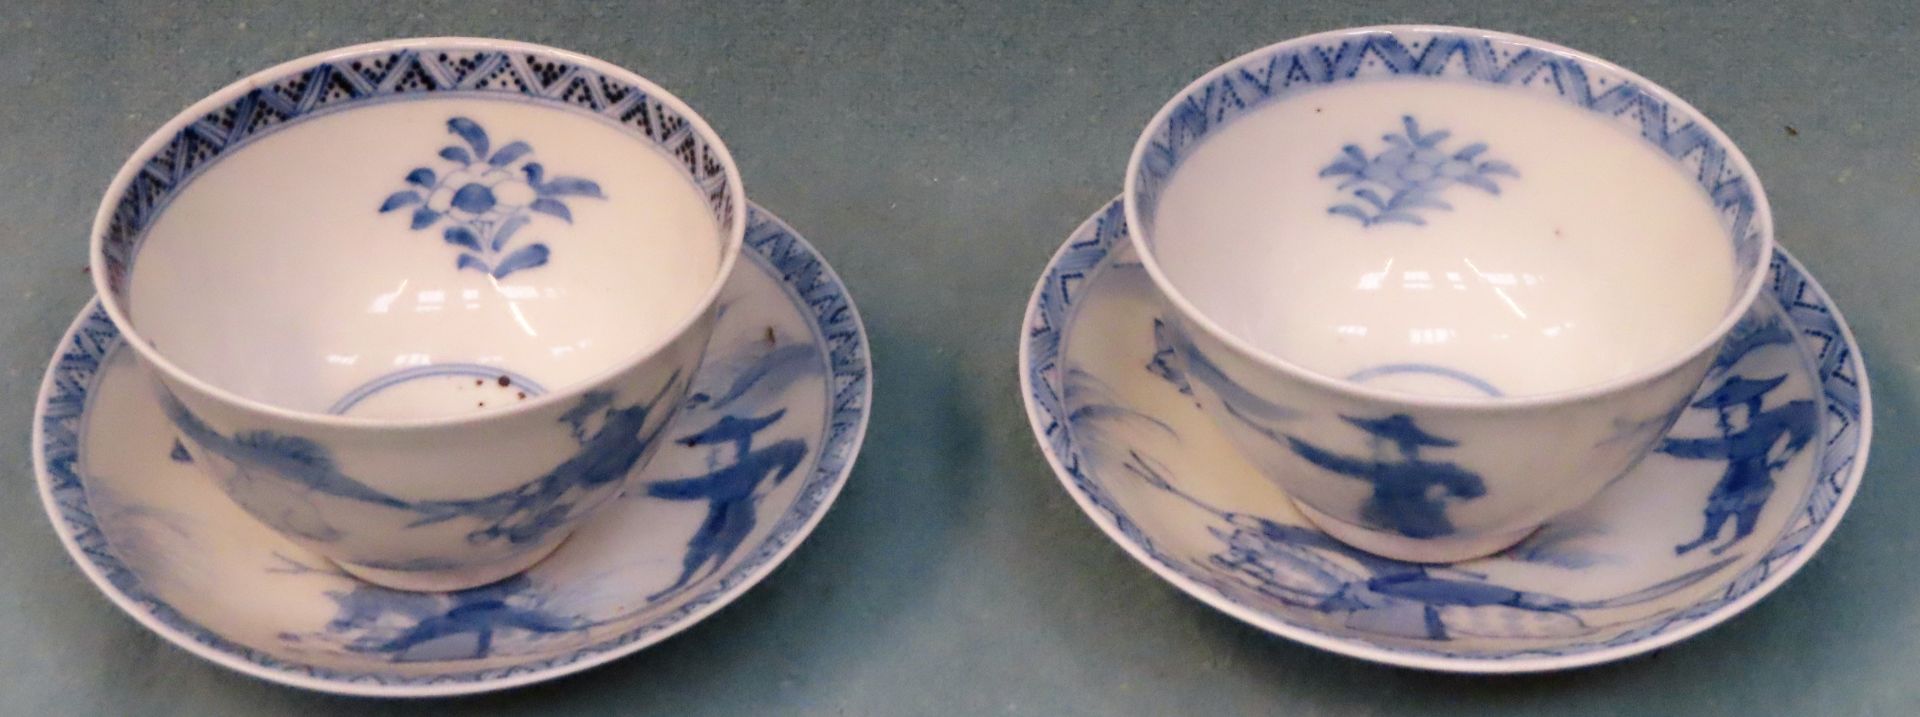 Two similar Oriental blue and white glazed ceramic tea bowls and saucers reasonable used condition